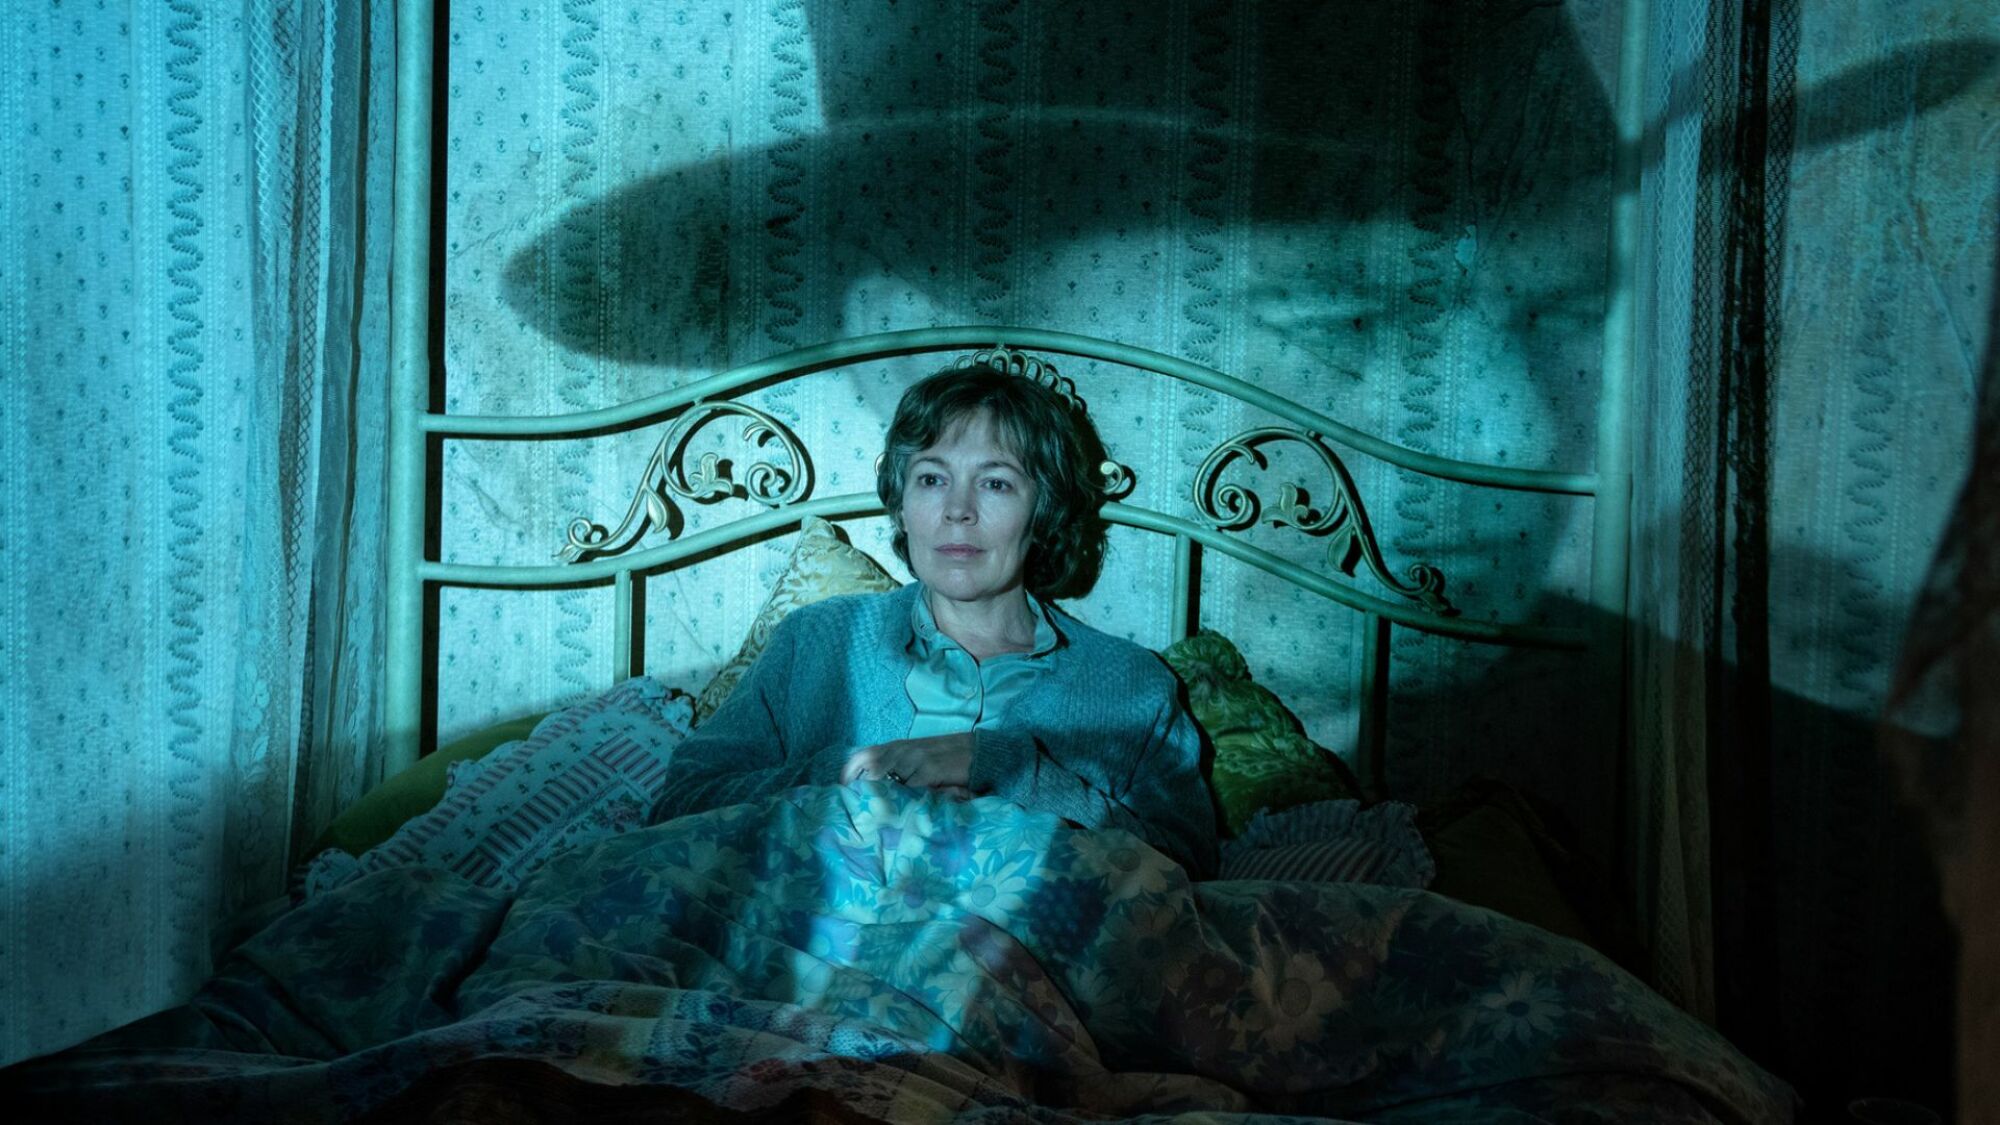 A middle-aged woman sits on a bed, a projection of a cowboy plays over her.